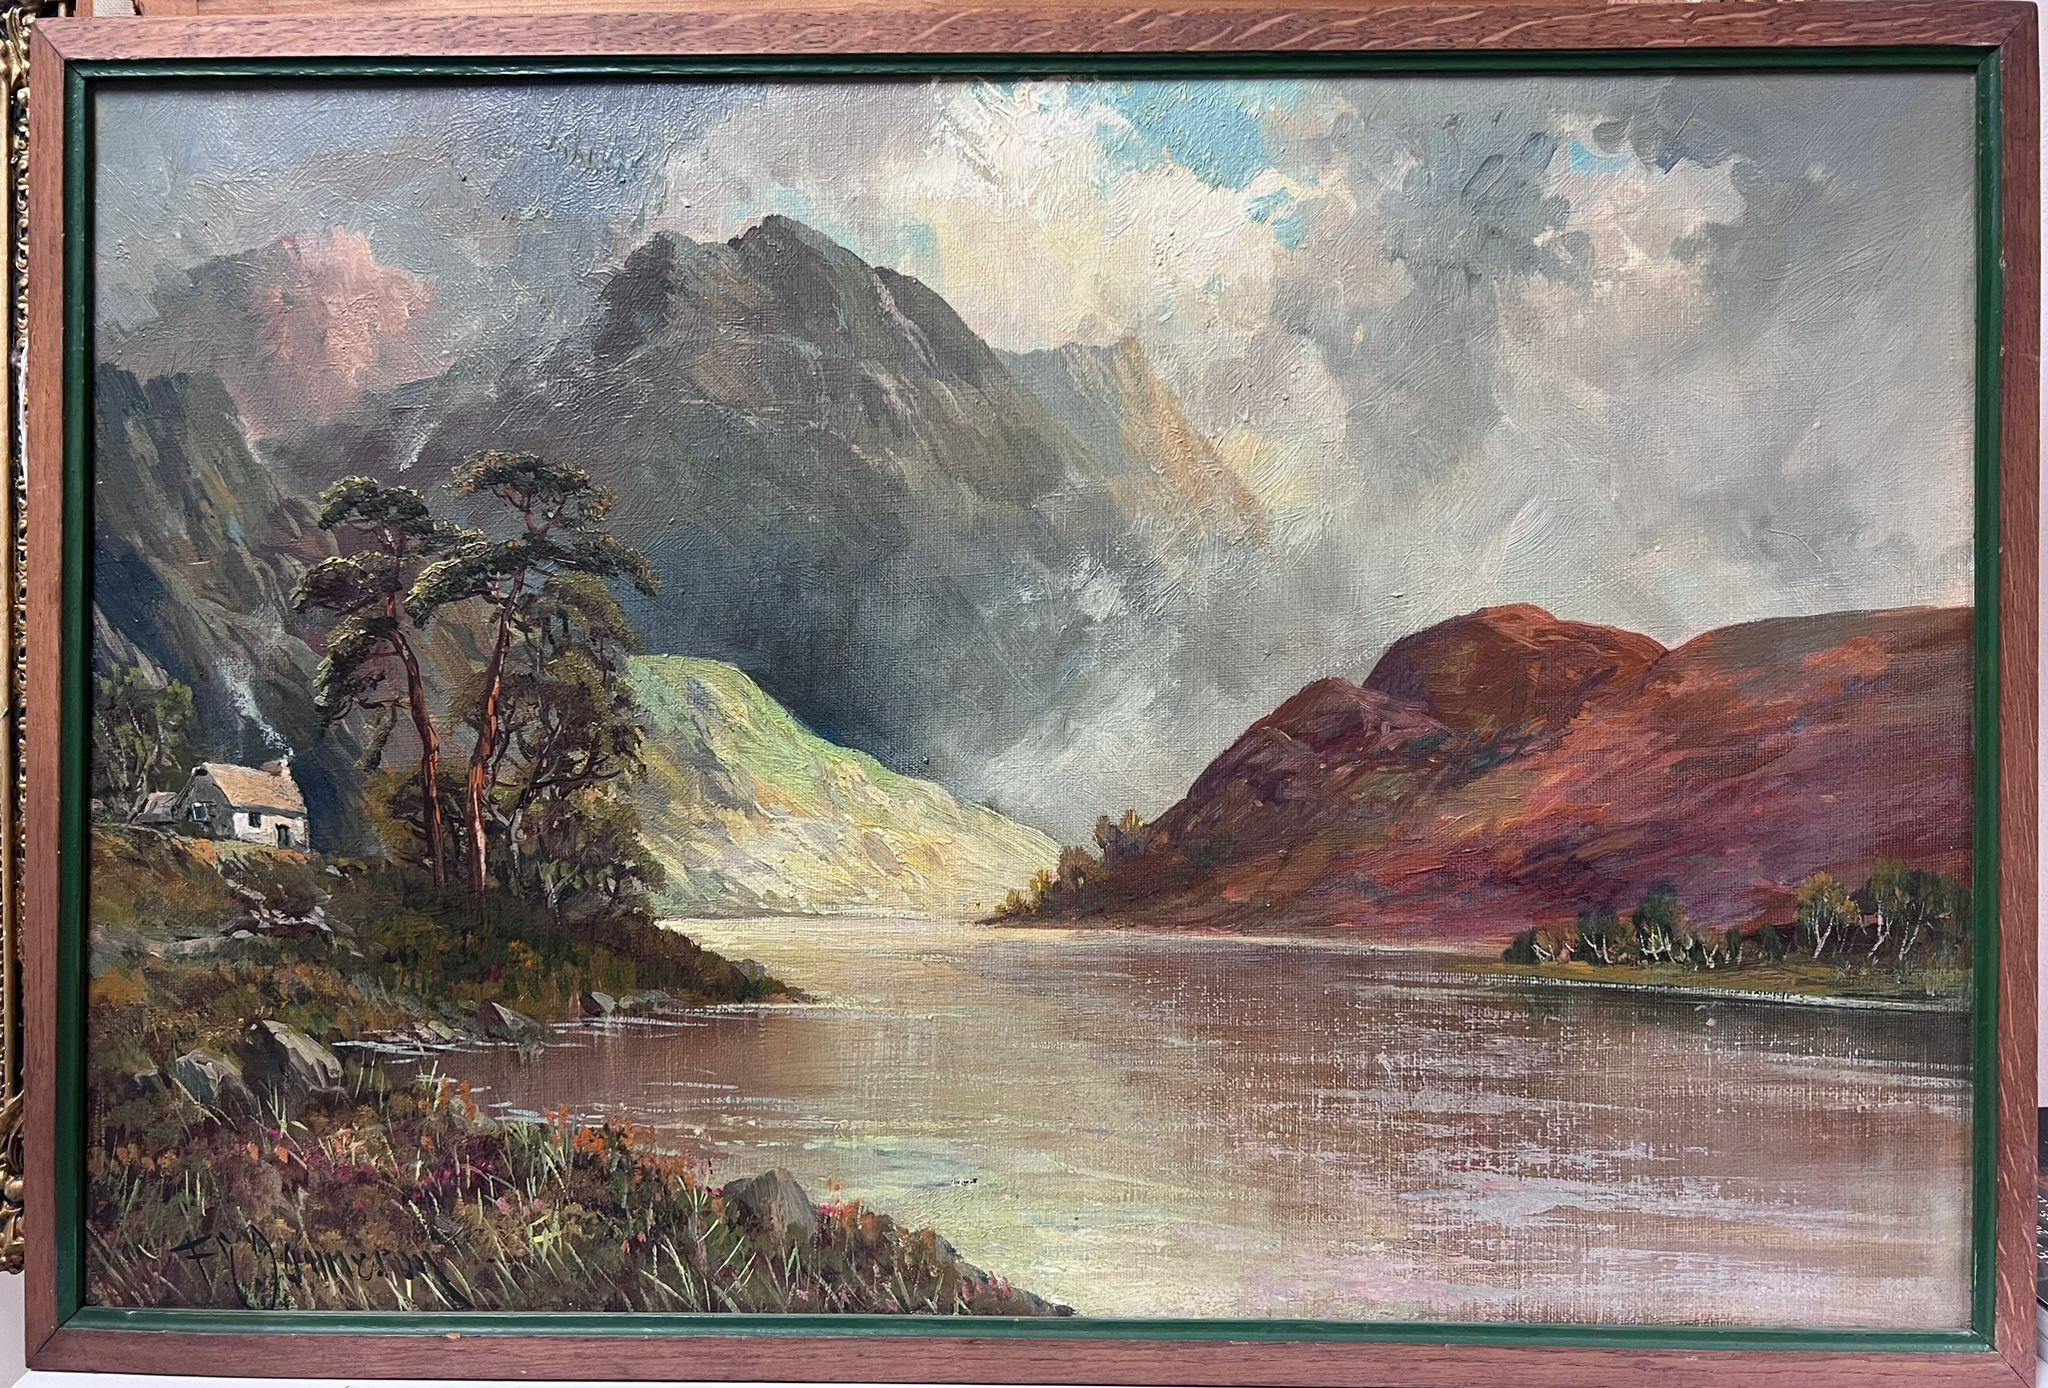 The Highland Loch
signed by F. E. Jamieson (British 1895-1950)
oil painting on canvas, framed
framed: 18 x 26 inches
canvas : 16 x 24 inches
provenance: private collection, UK
condition: very good and sound condition 
